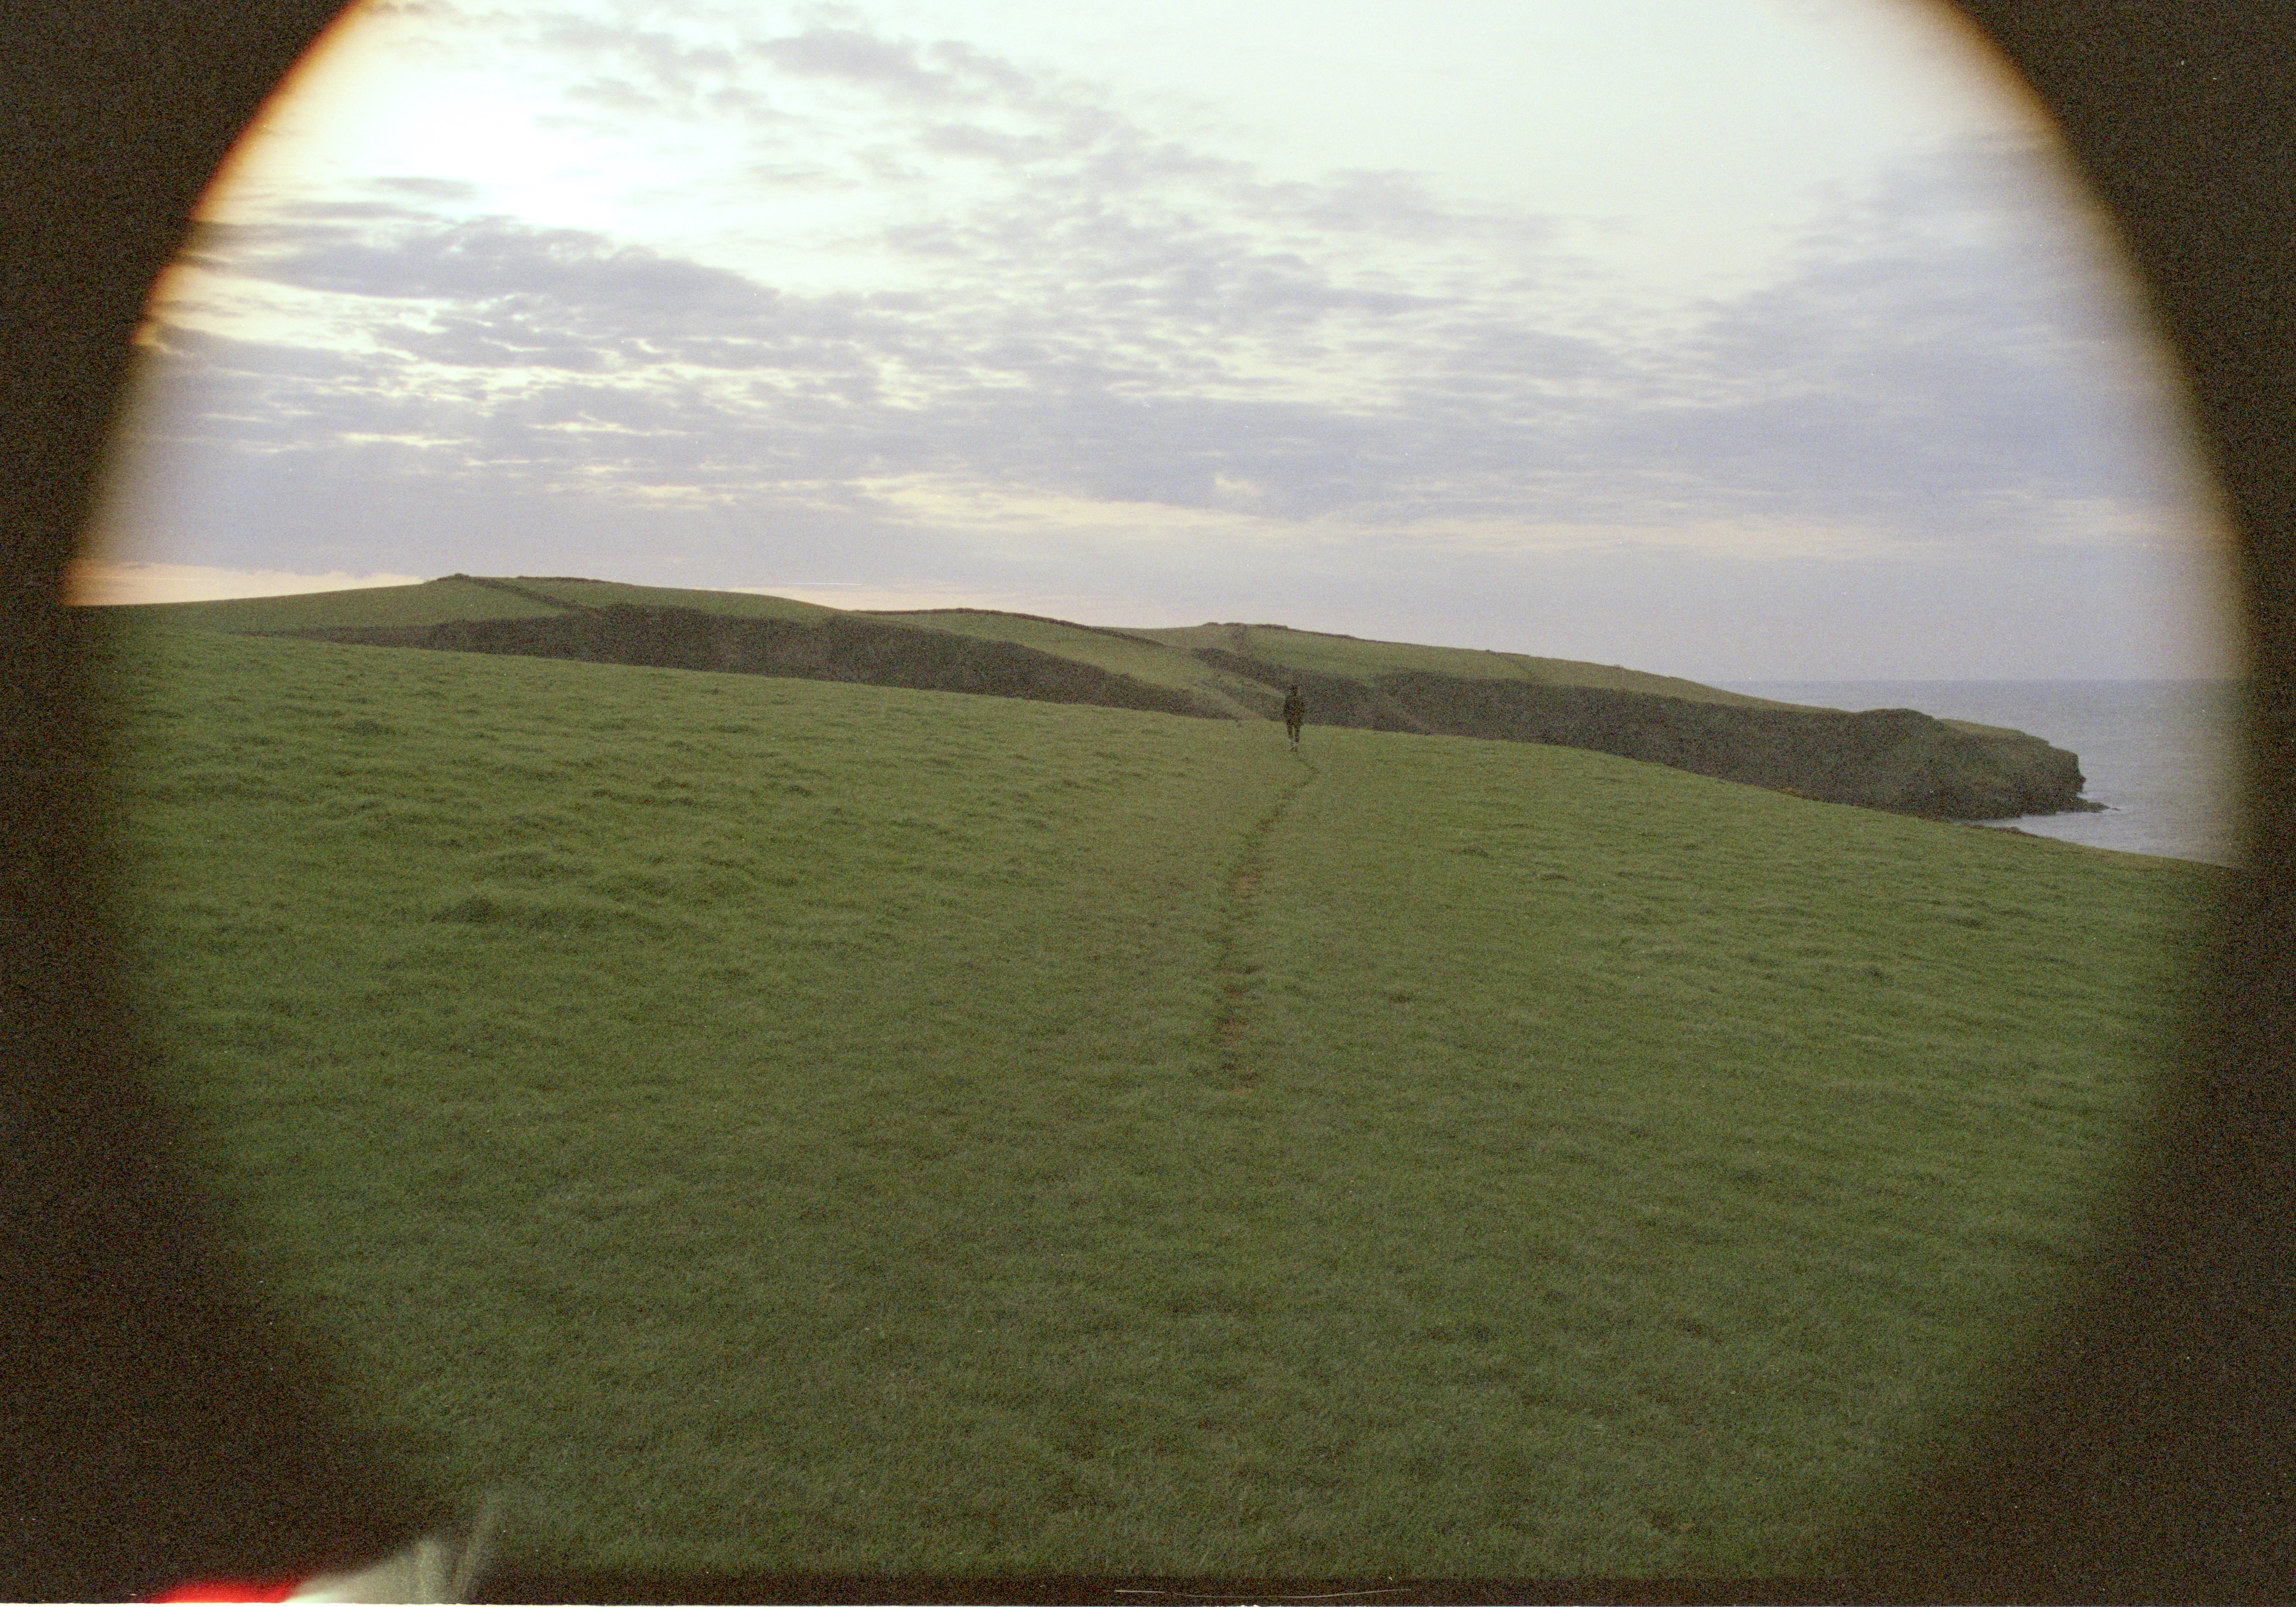 Lindsay walking in Port Isaac in grass with lens vignetting